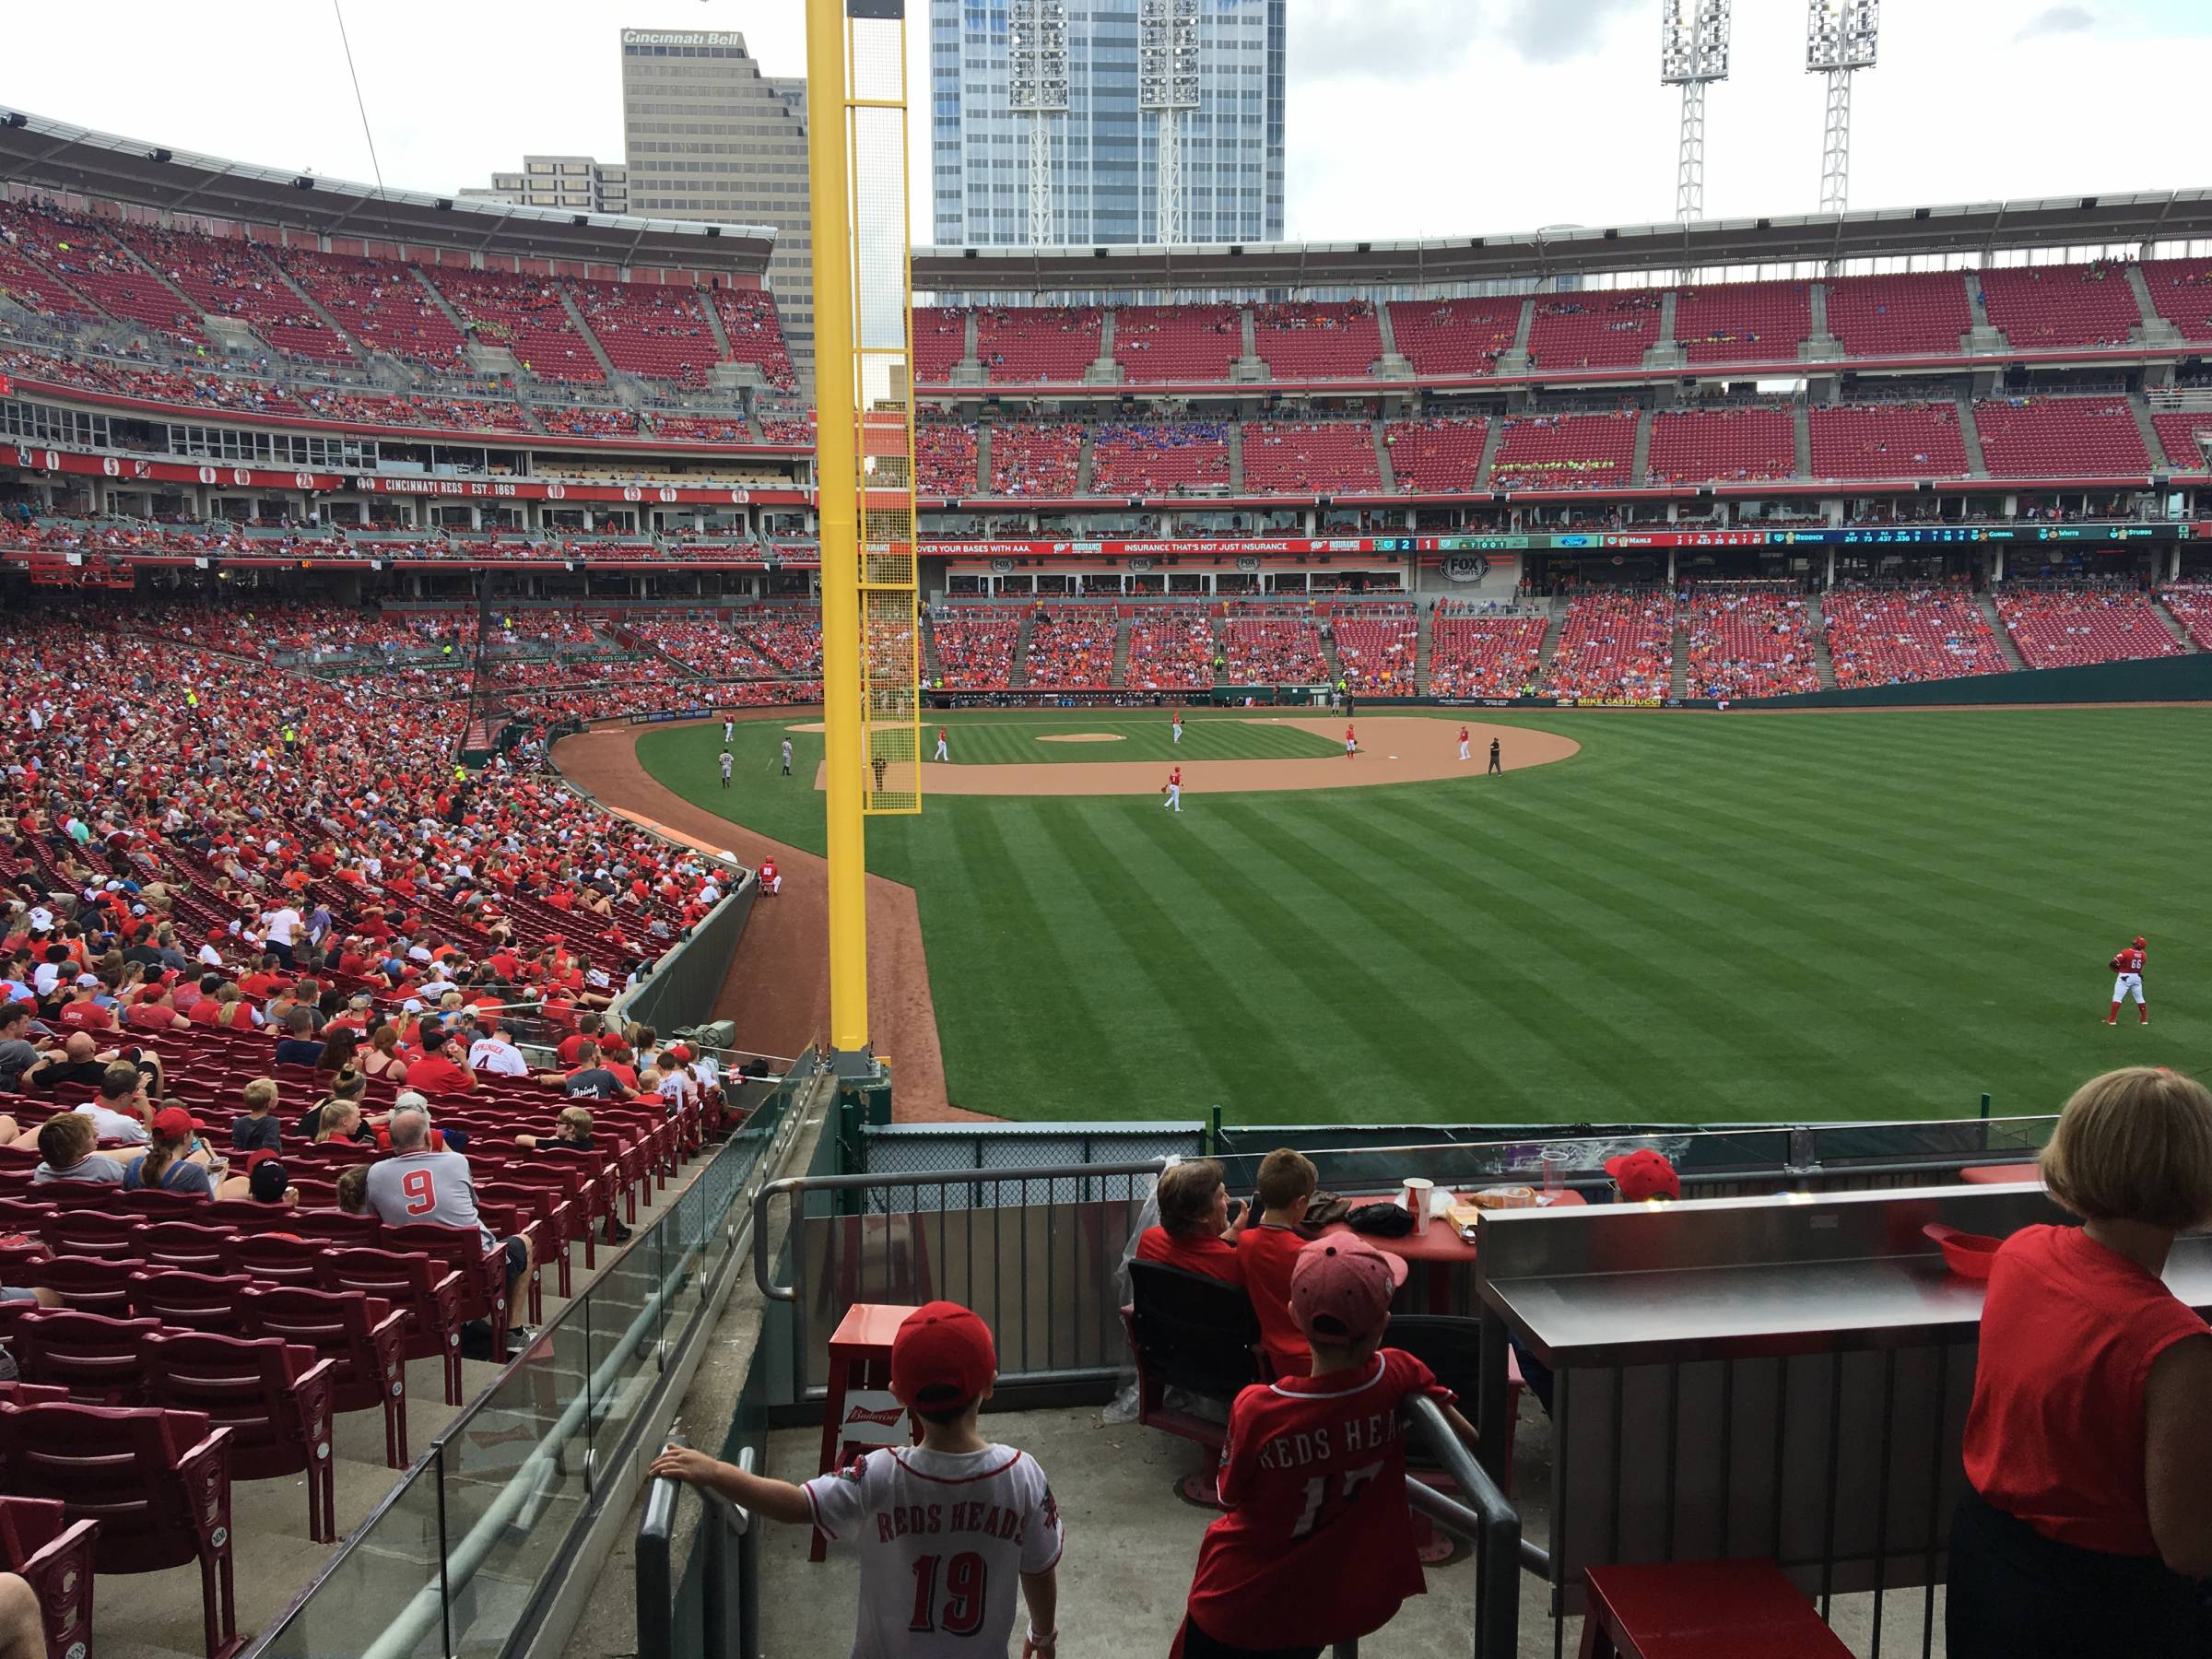 Shaded Seats at Great American Ball Park - Reds Tickets in Shade